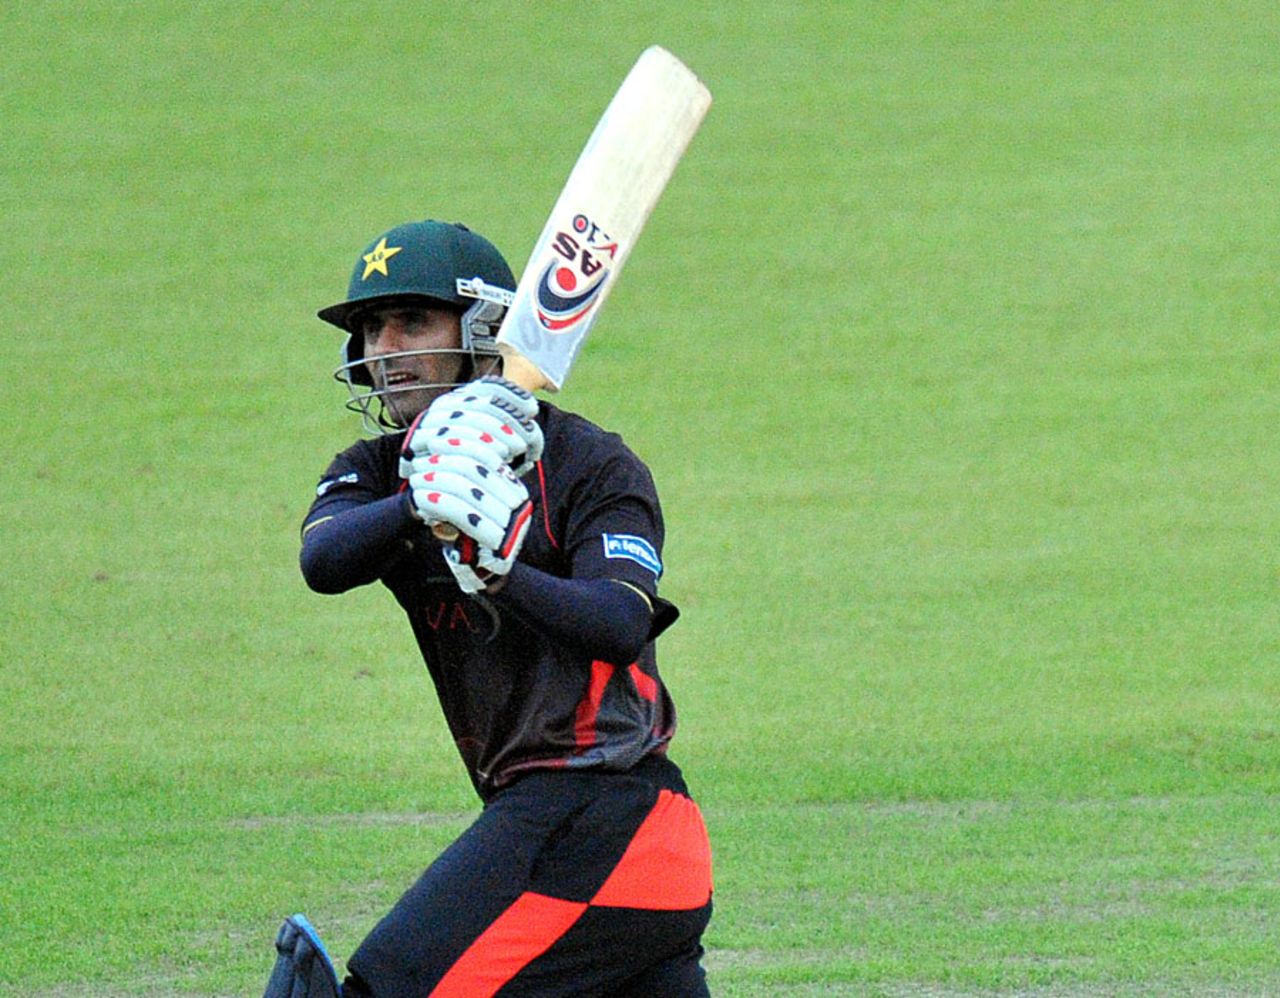 Abdul Razzaq hit 60 off 32 balls on his Leicestershire debut, Lancashire v Leicestershire, Friends Life t20, Old Trafford, June 8, 2011